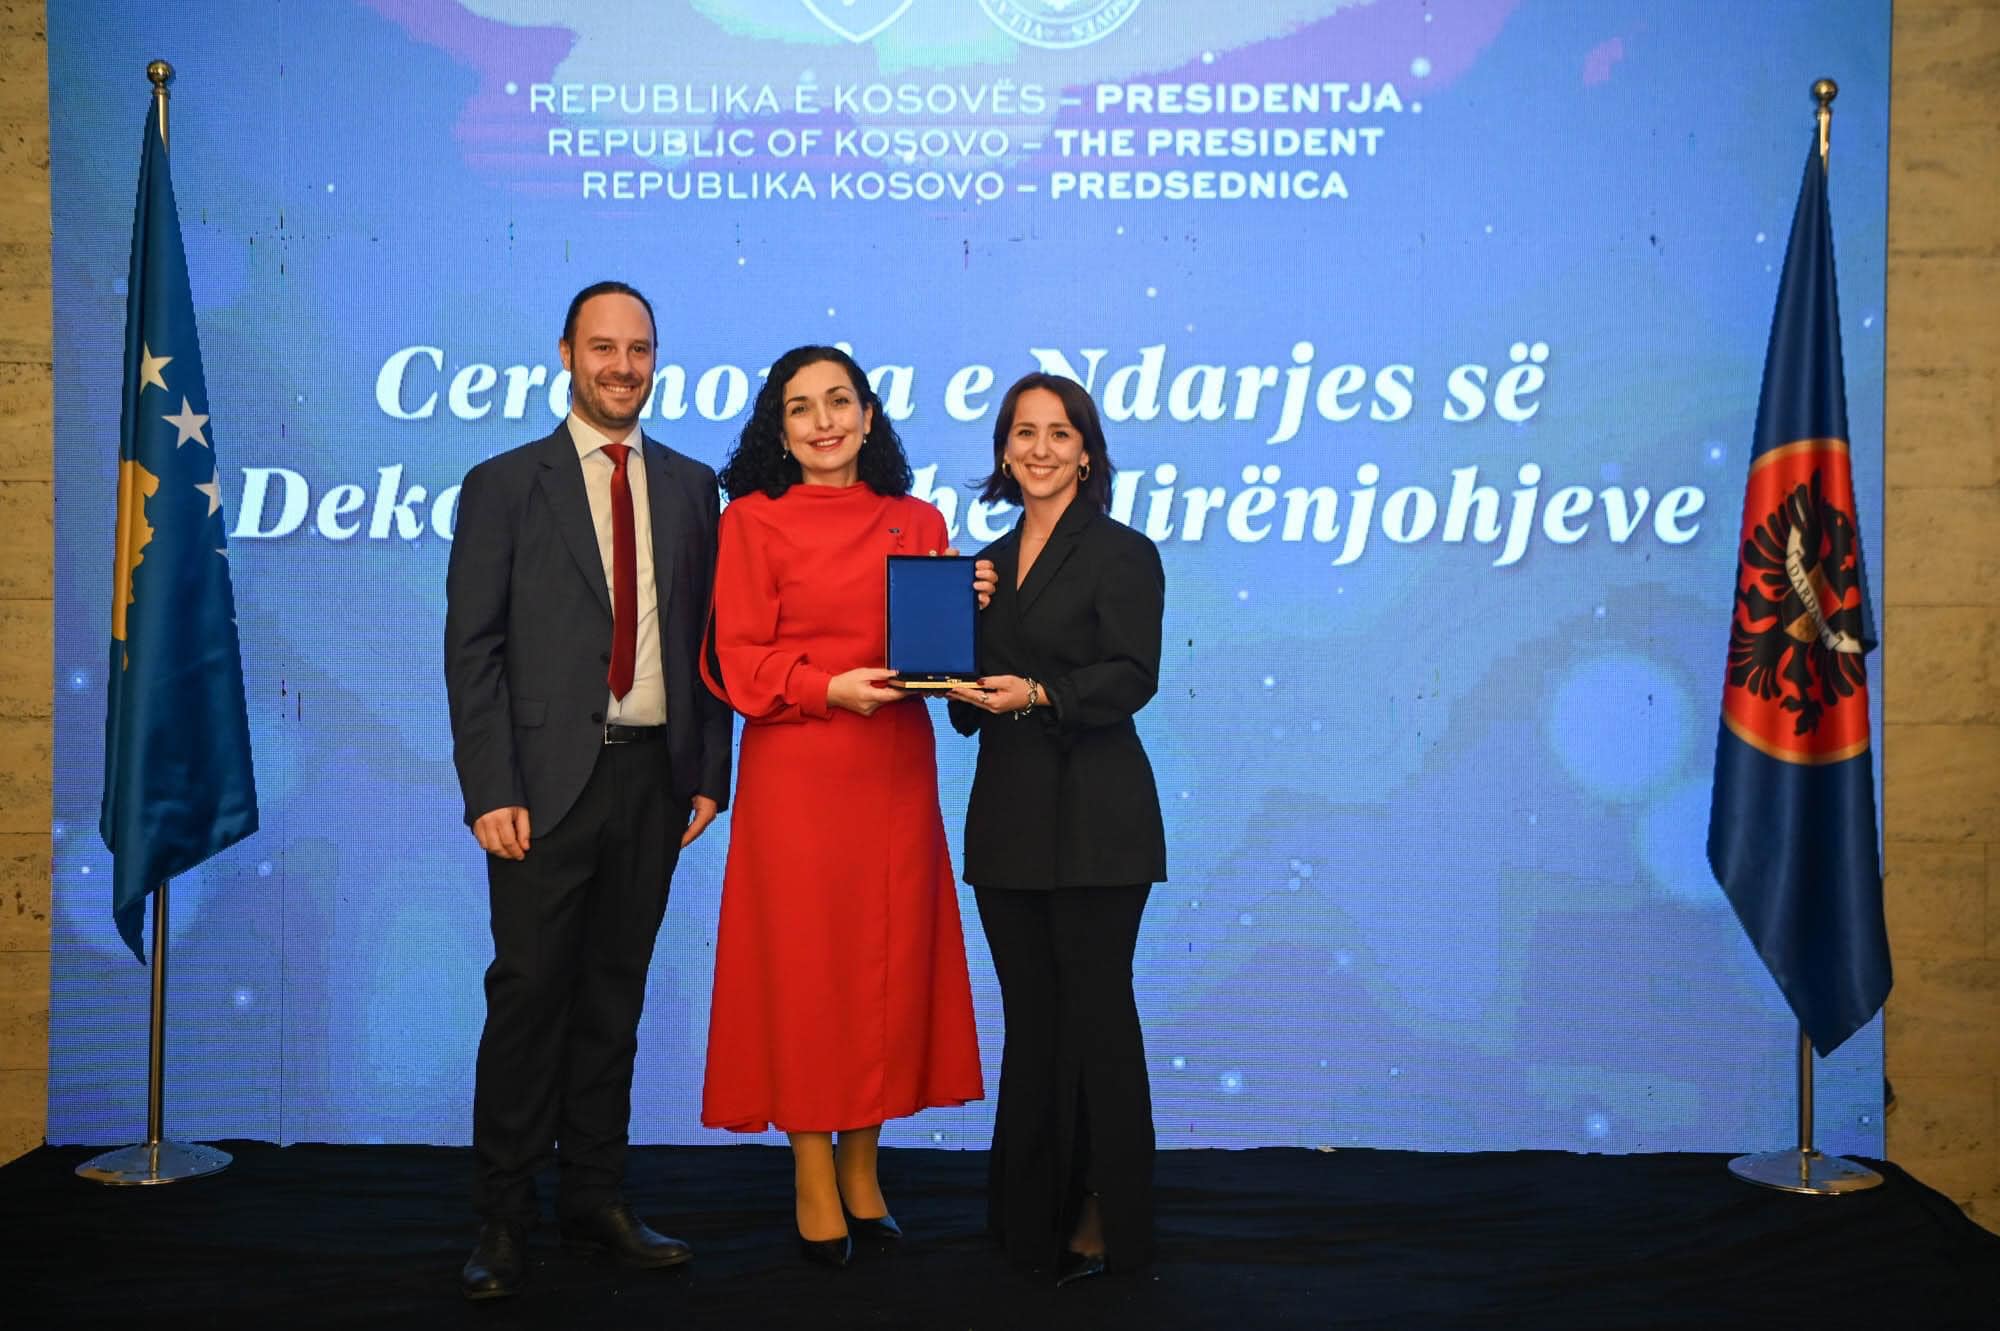 Honored with Award and Recognition by the President of the Republic of Kosovo, Vjosa Osmani